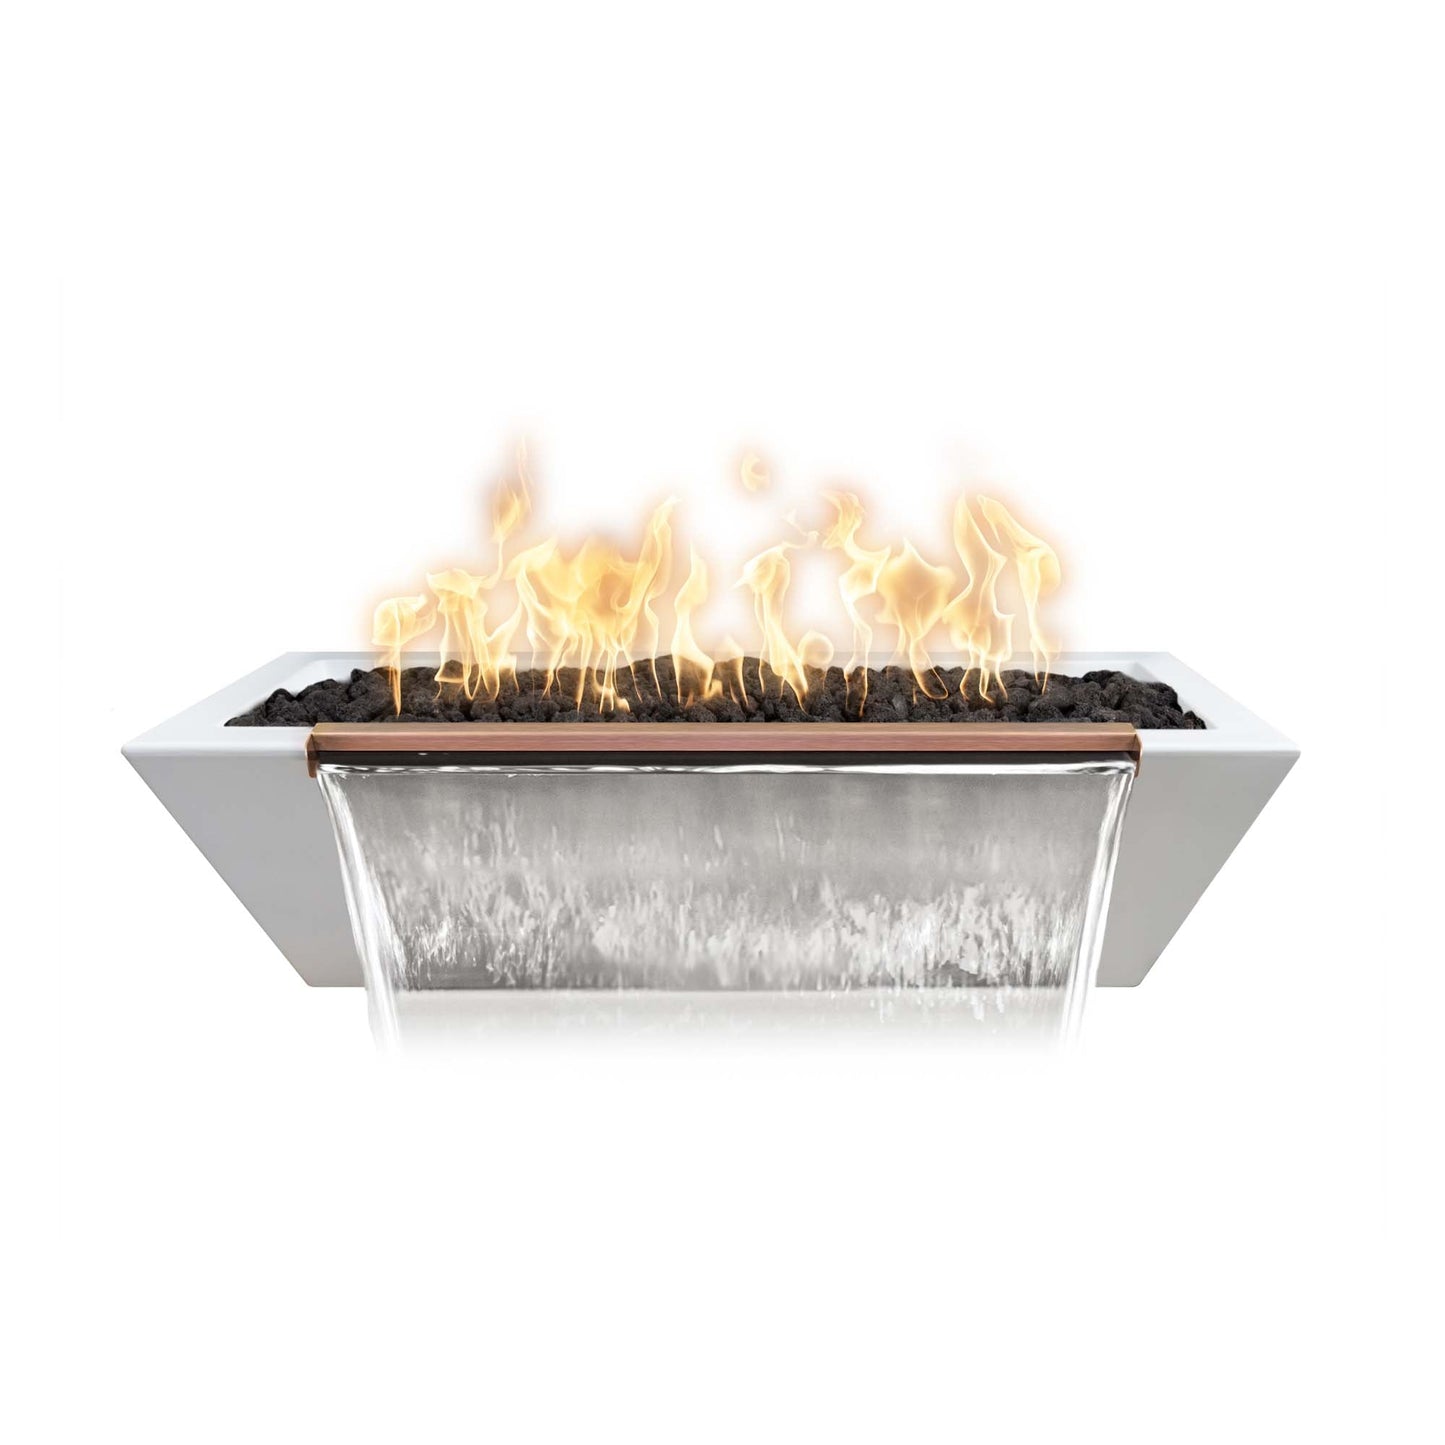 The Outdoor Plus Linear Maya 60" Natural Gray GFRC Concrete Liquid Propane Fire & Water Bowl with Match Lit with Flame Sense Ignition